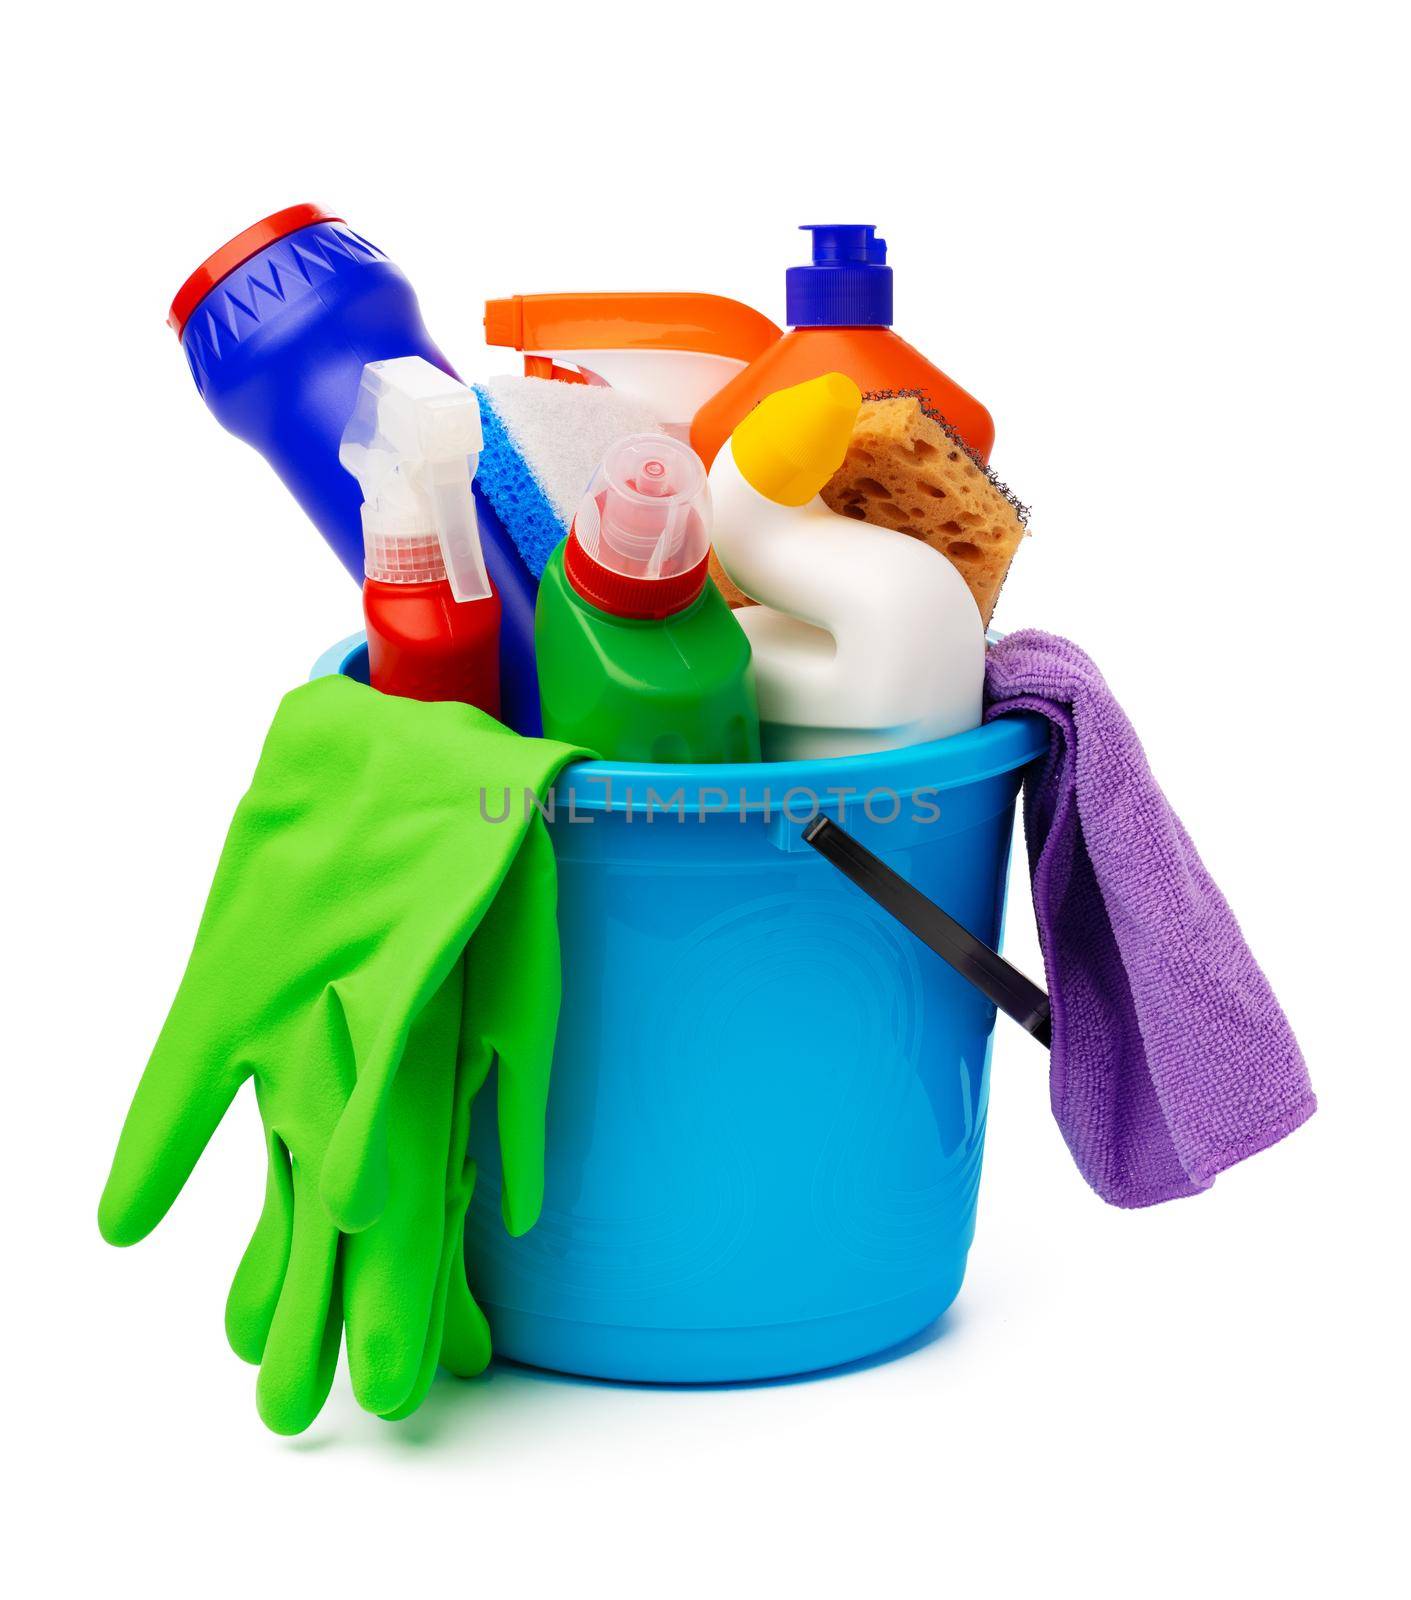 Liquid detergents and cleaning supplies in plastic bucket on white background by Fabrikasimf